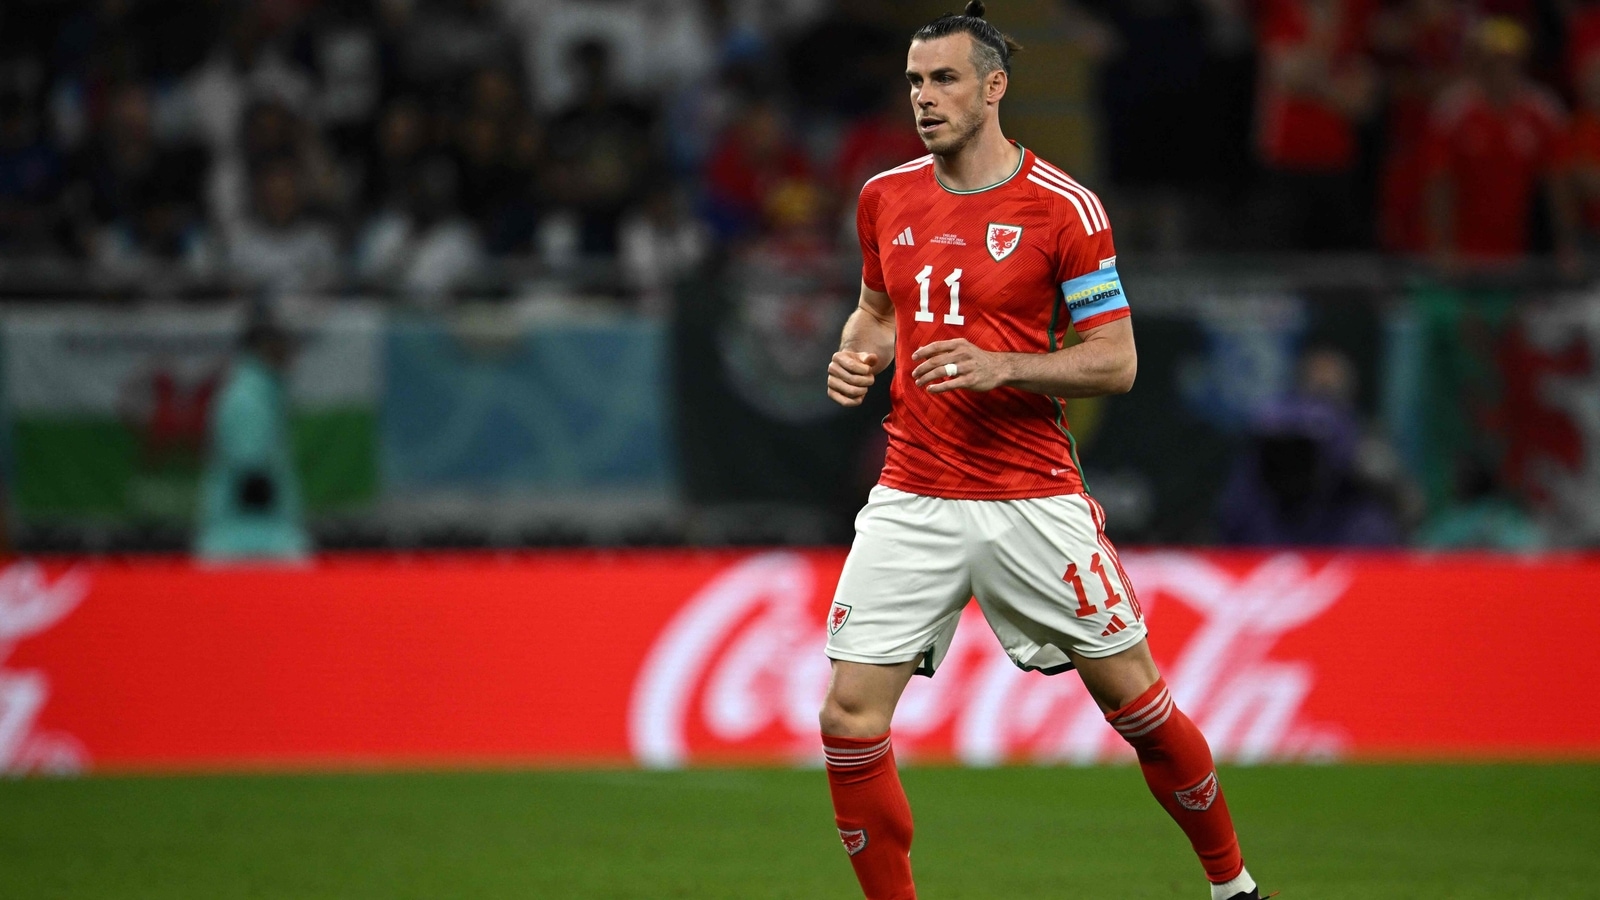 Gareth Bale announces retirement from club and international